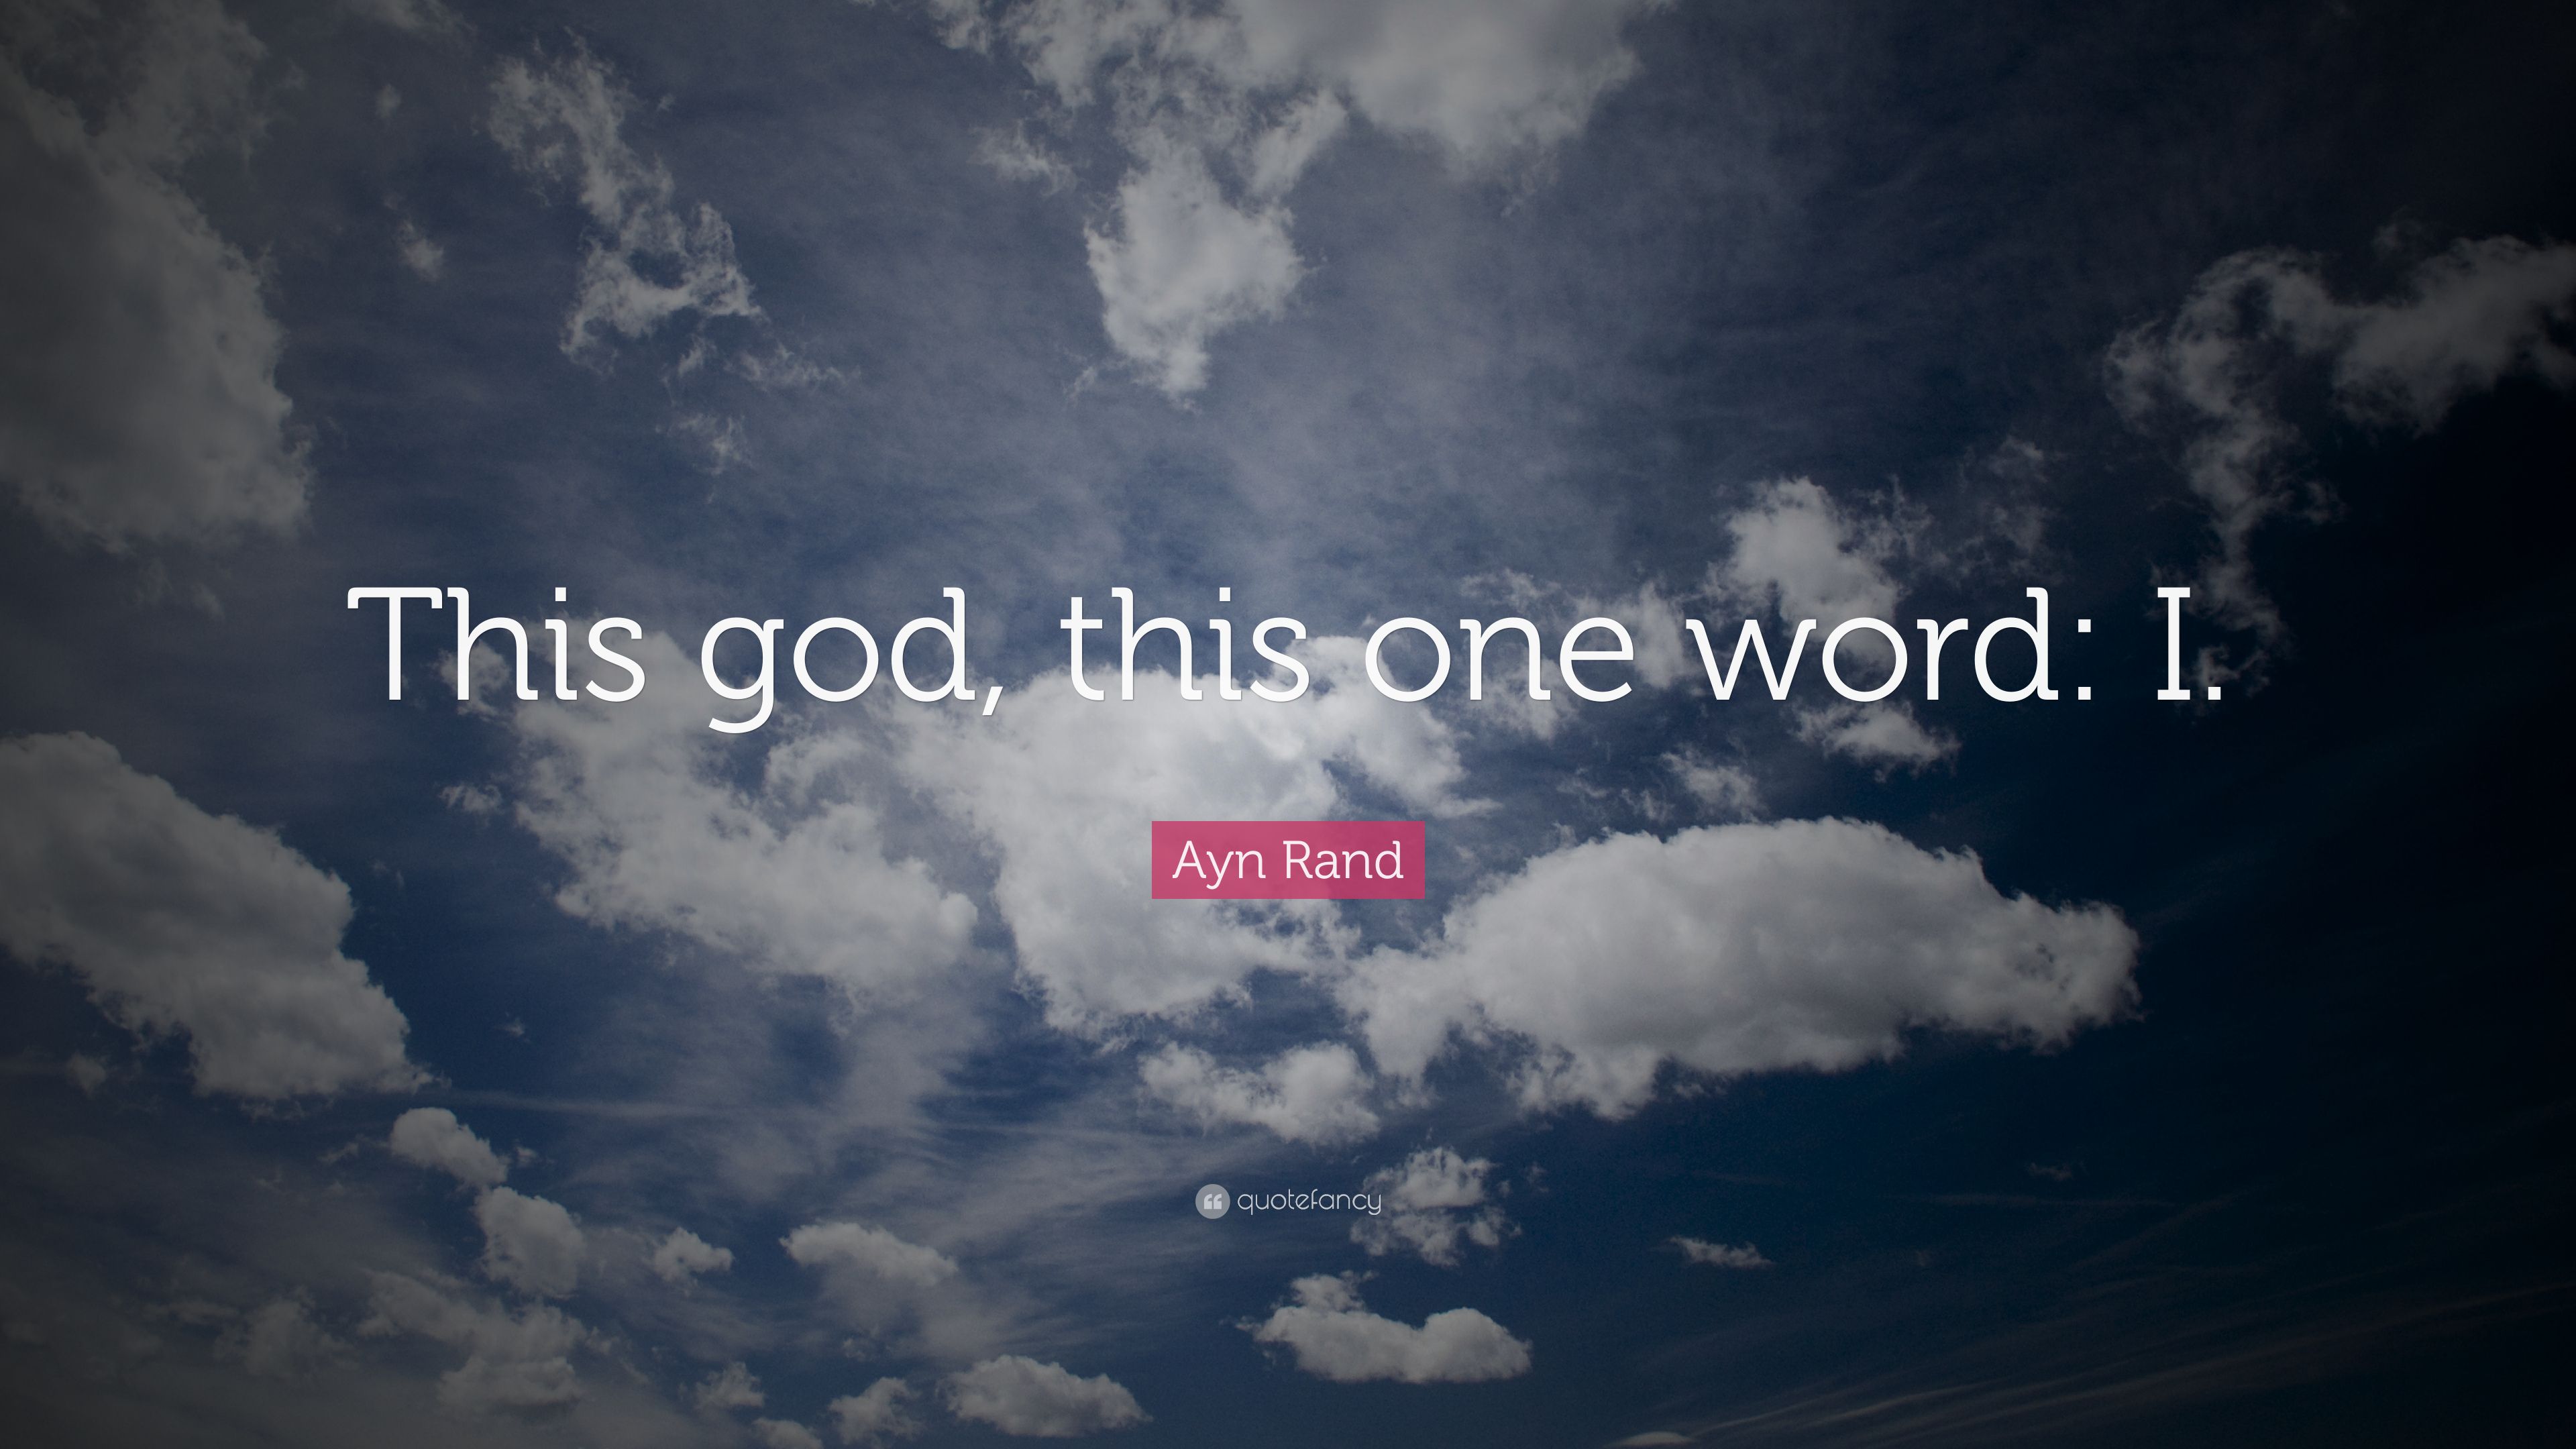 Ayn Rand Quote: “This god, this one word: I.” 12 wallpaper